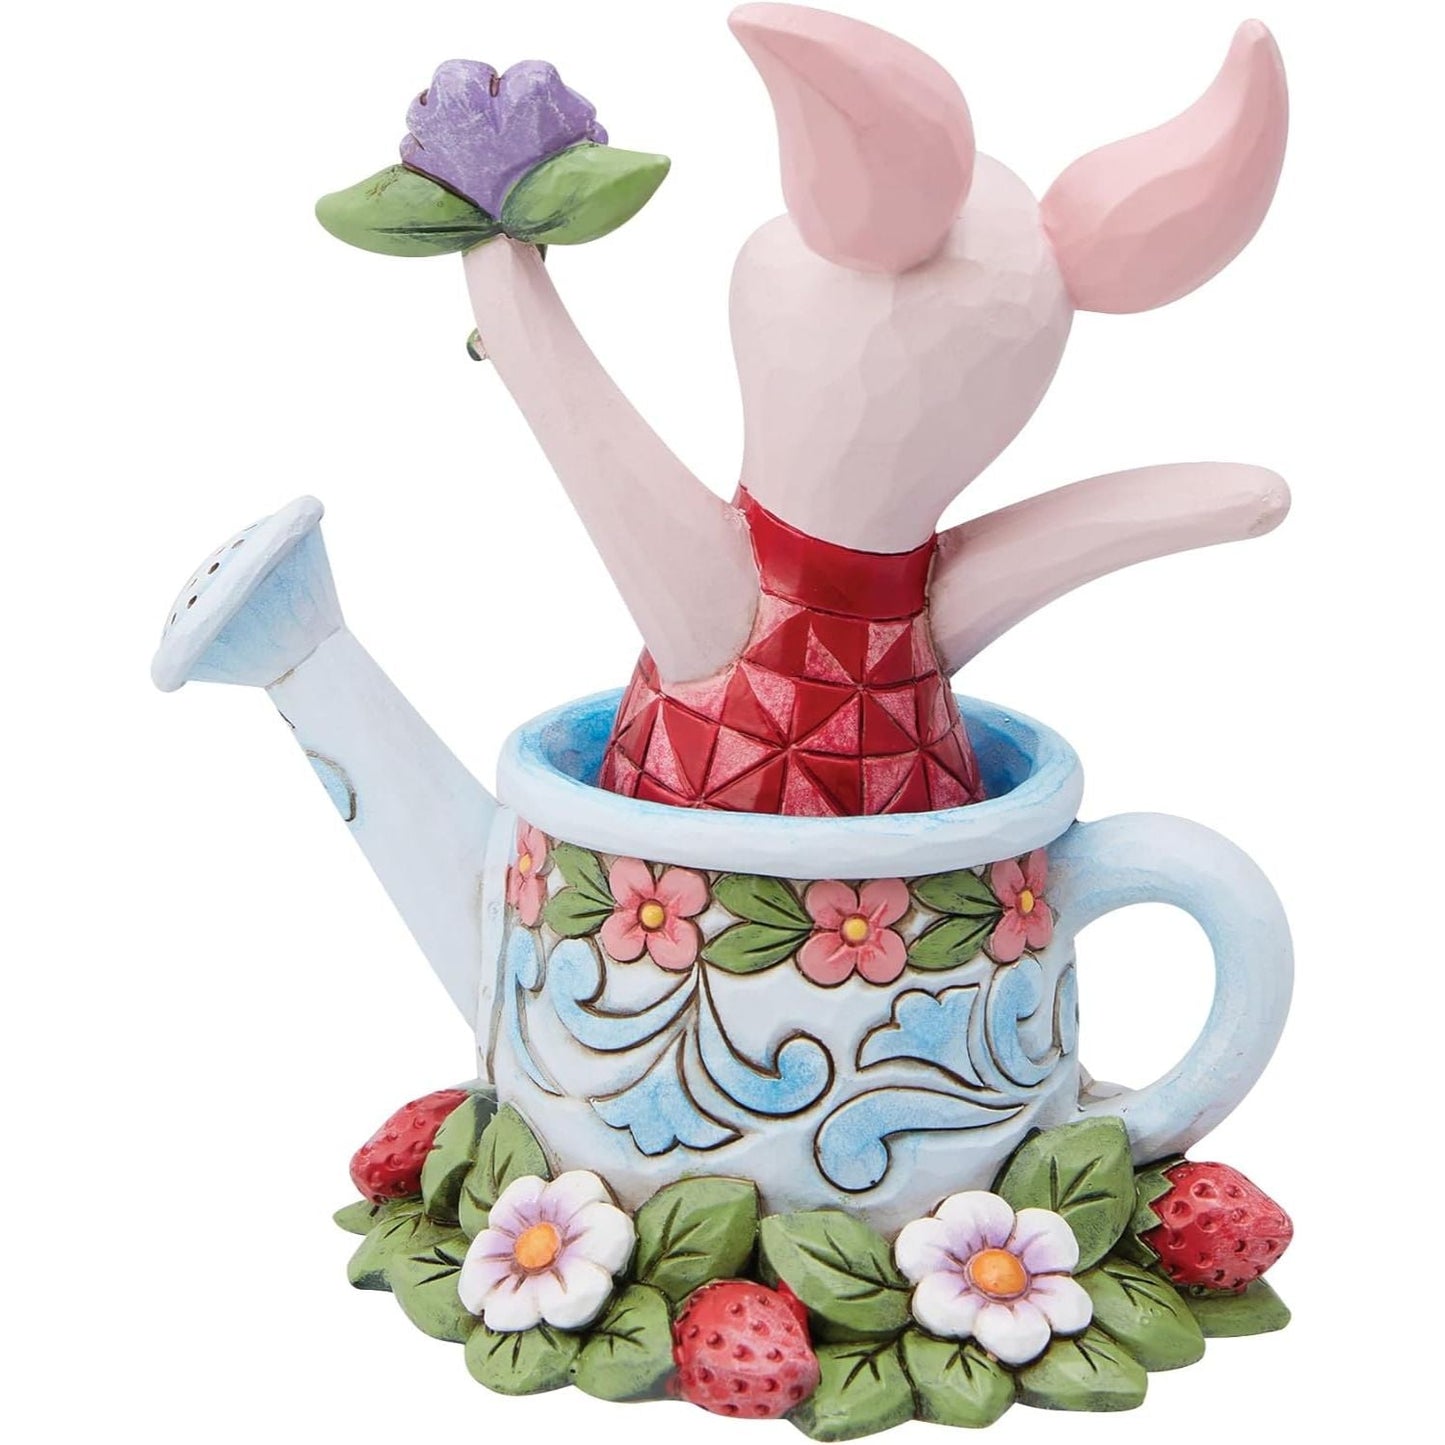 Disney Traditions by Jim Shore Winnie The Pooh Piglet in Watering Can Figurine, 4.5"